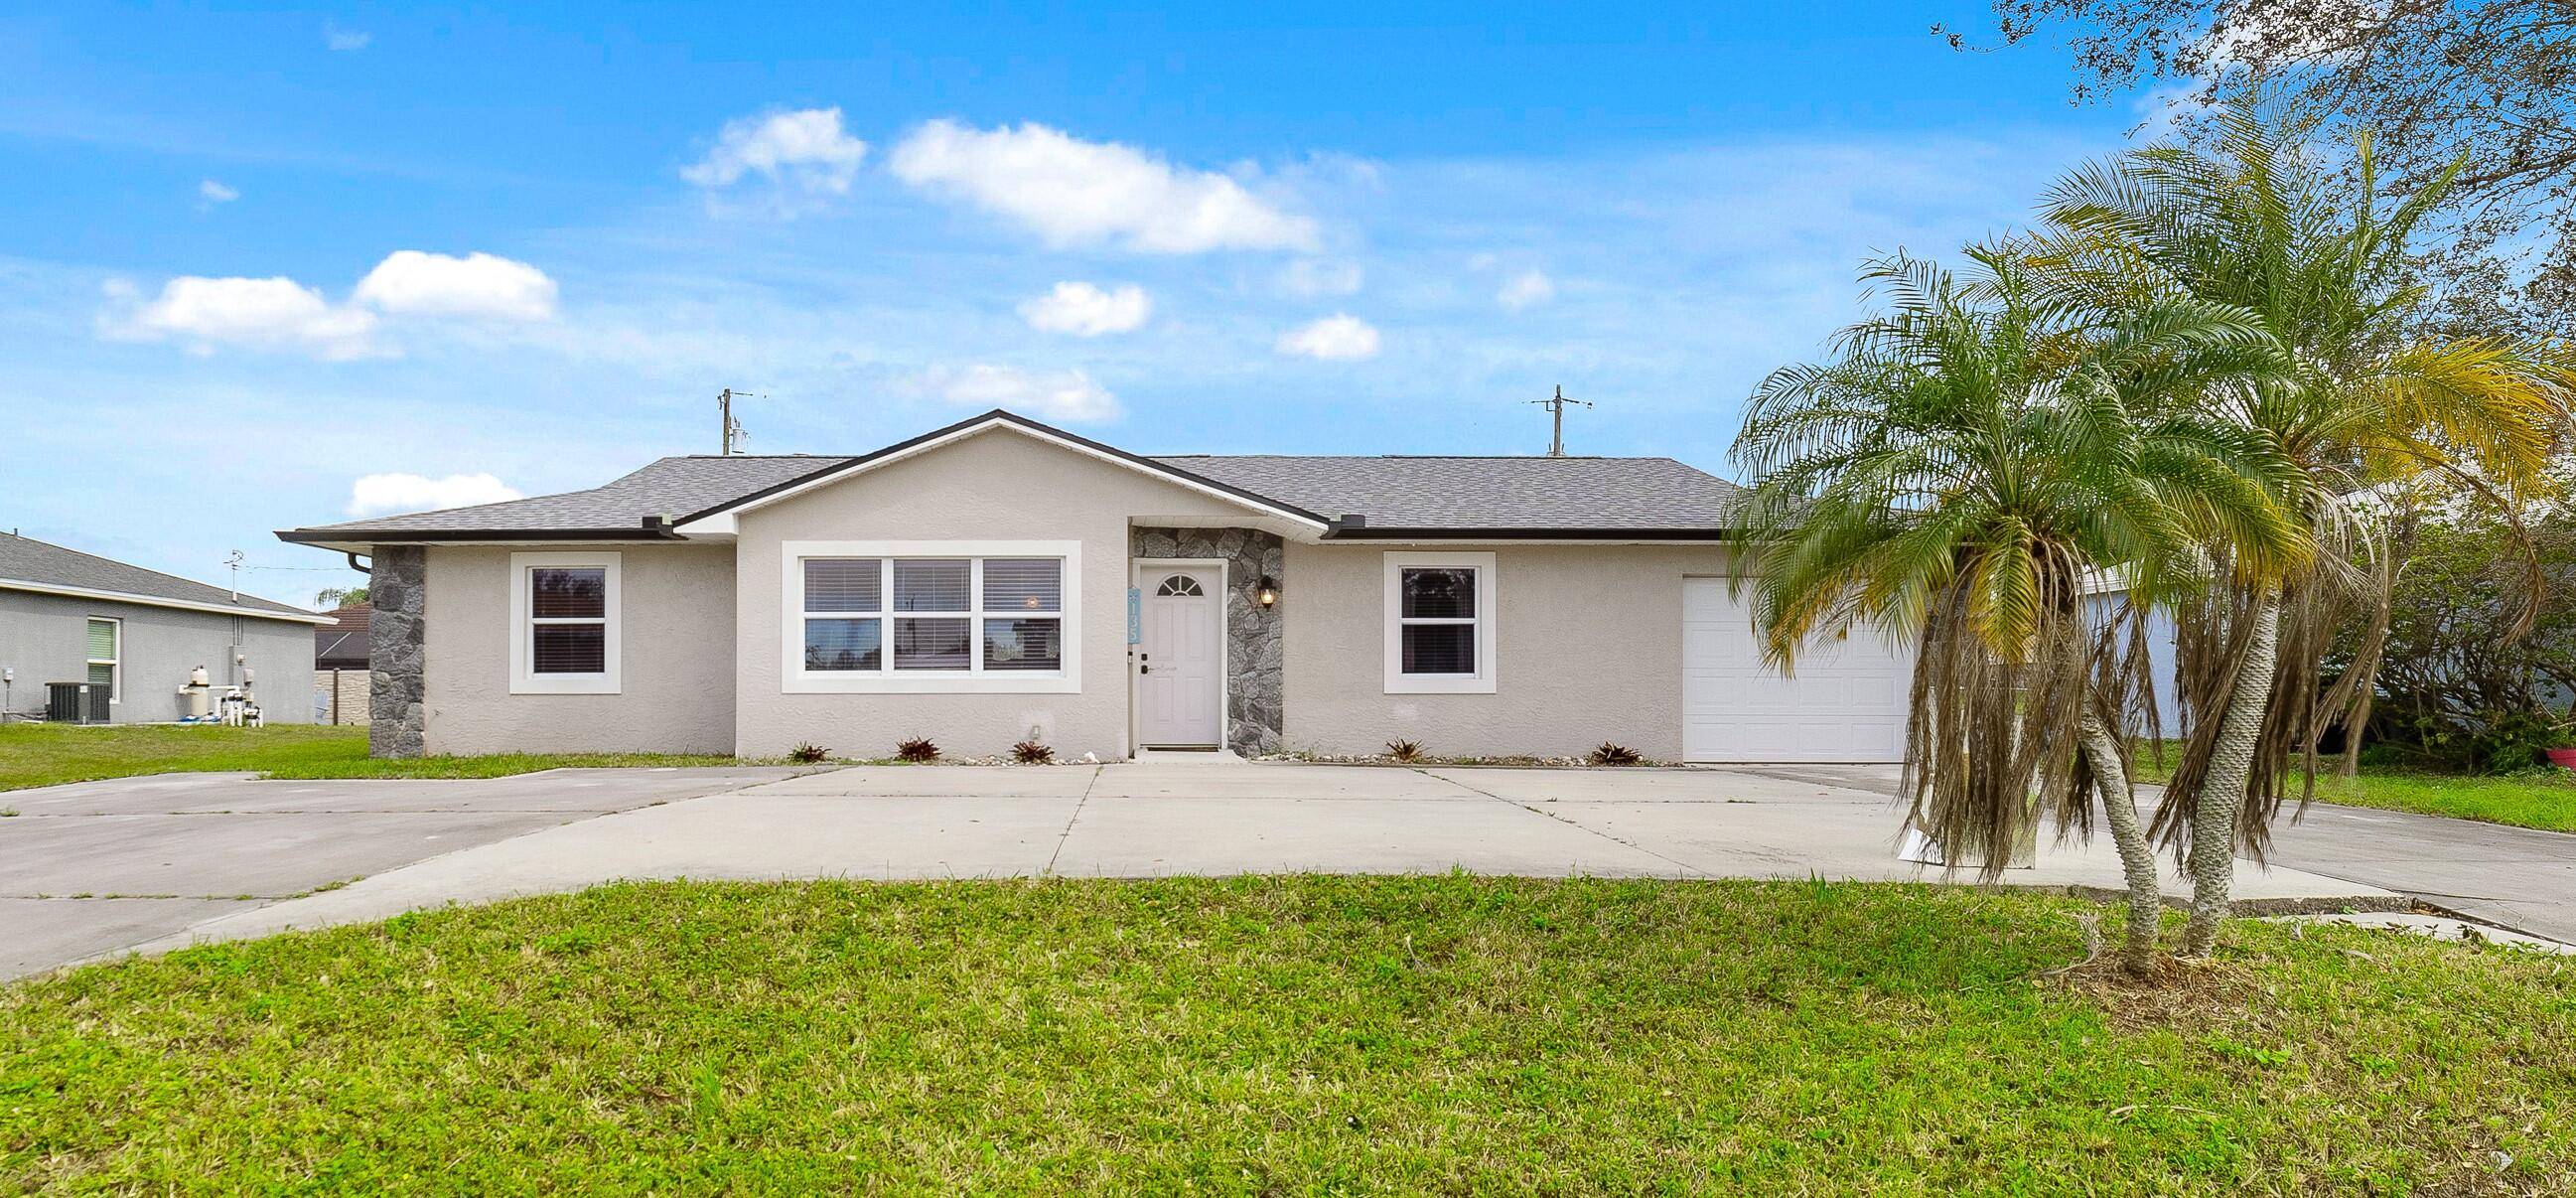 Welcome home to this CBS construction fully fenced home with no HOA !